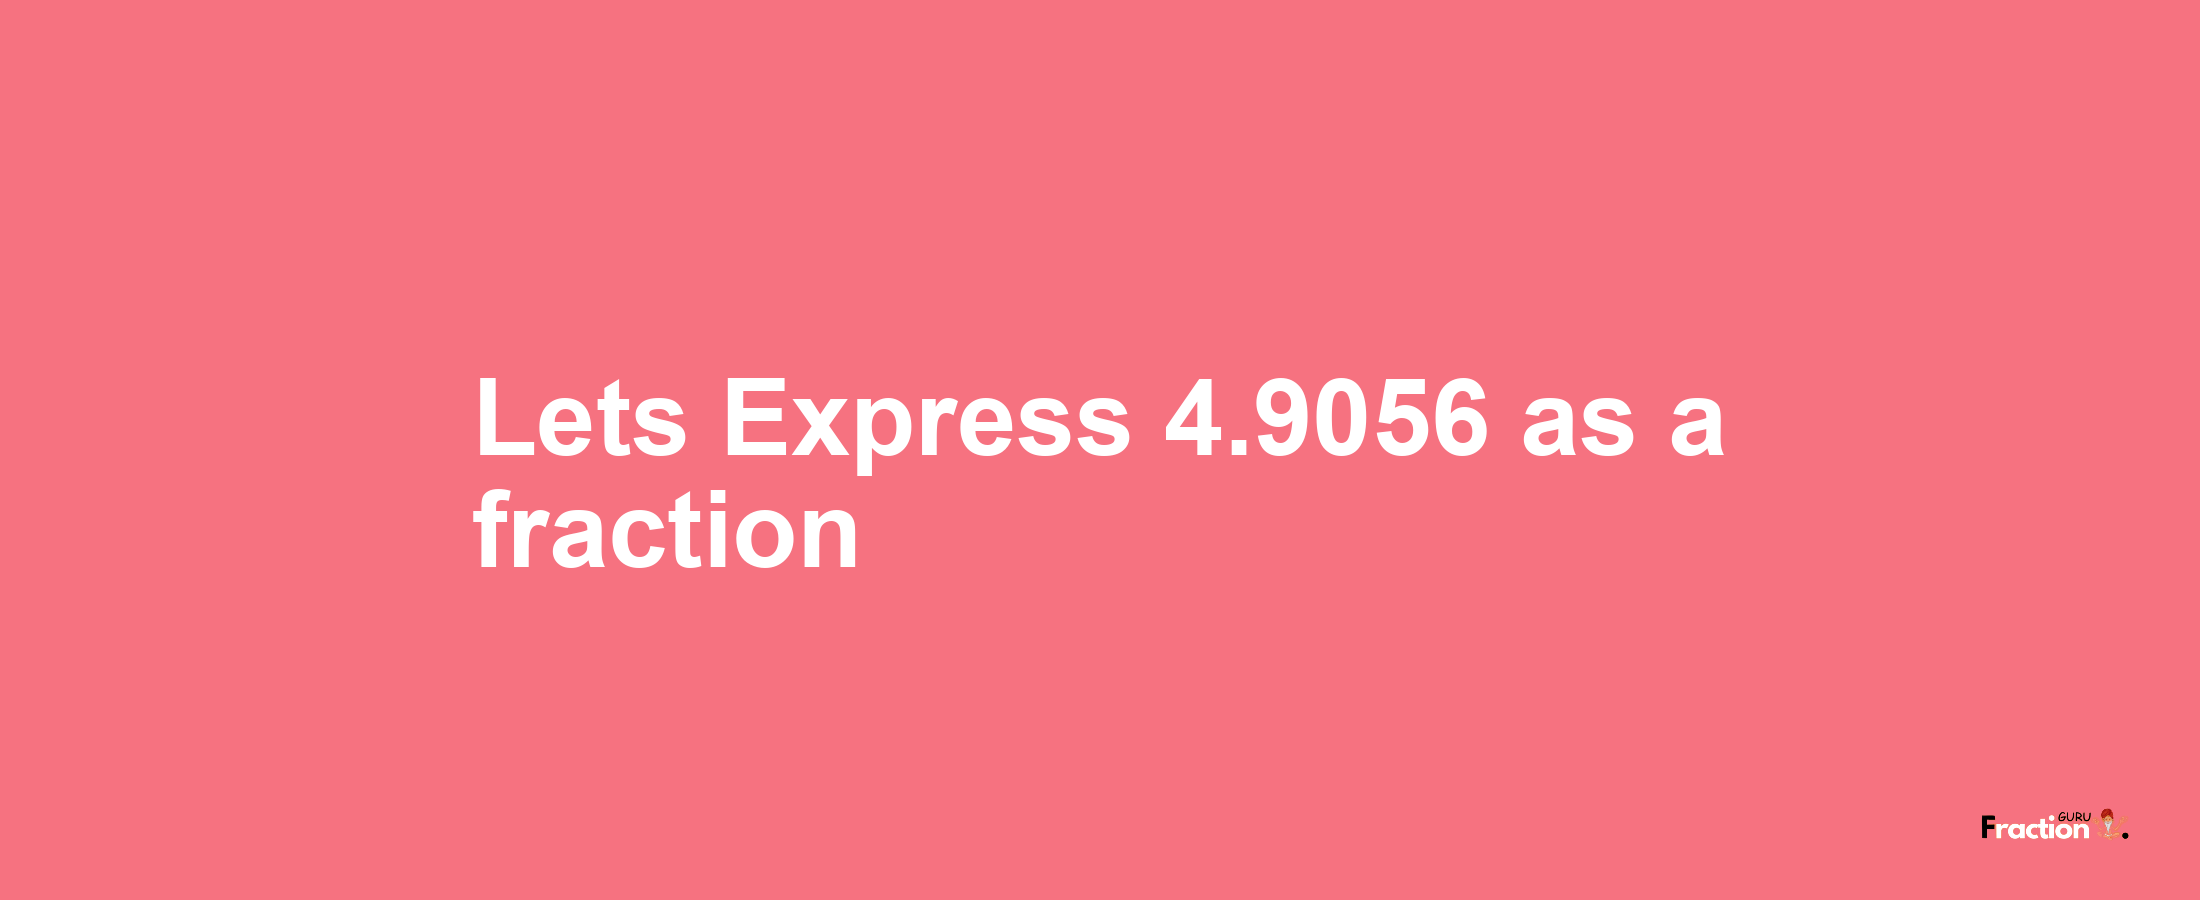 Lets Express 4.9056 as afraction